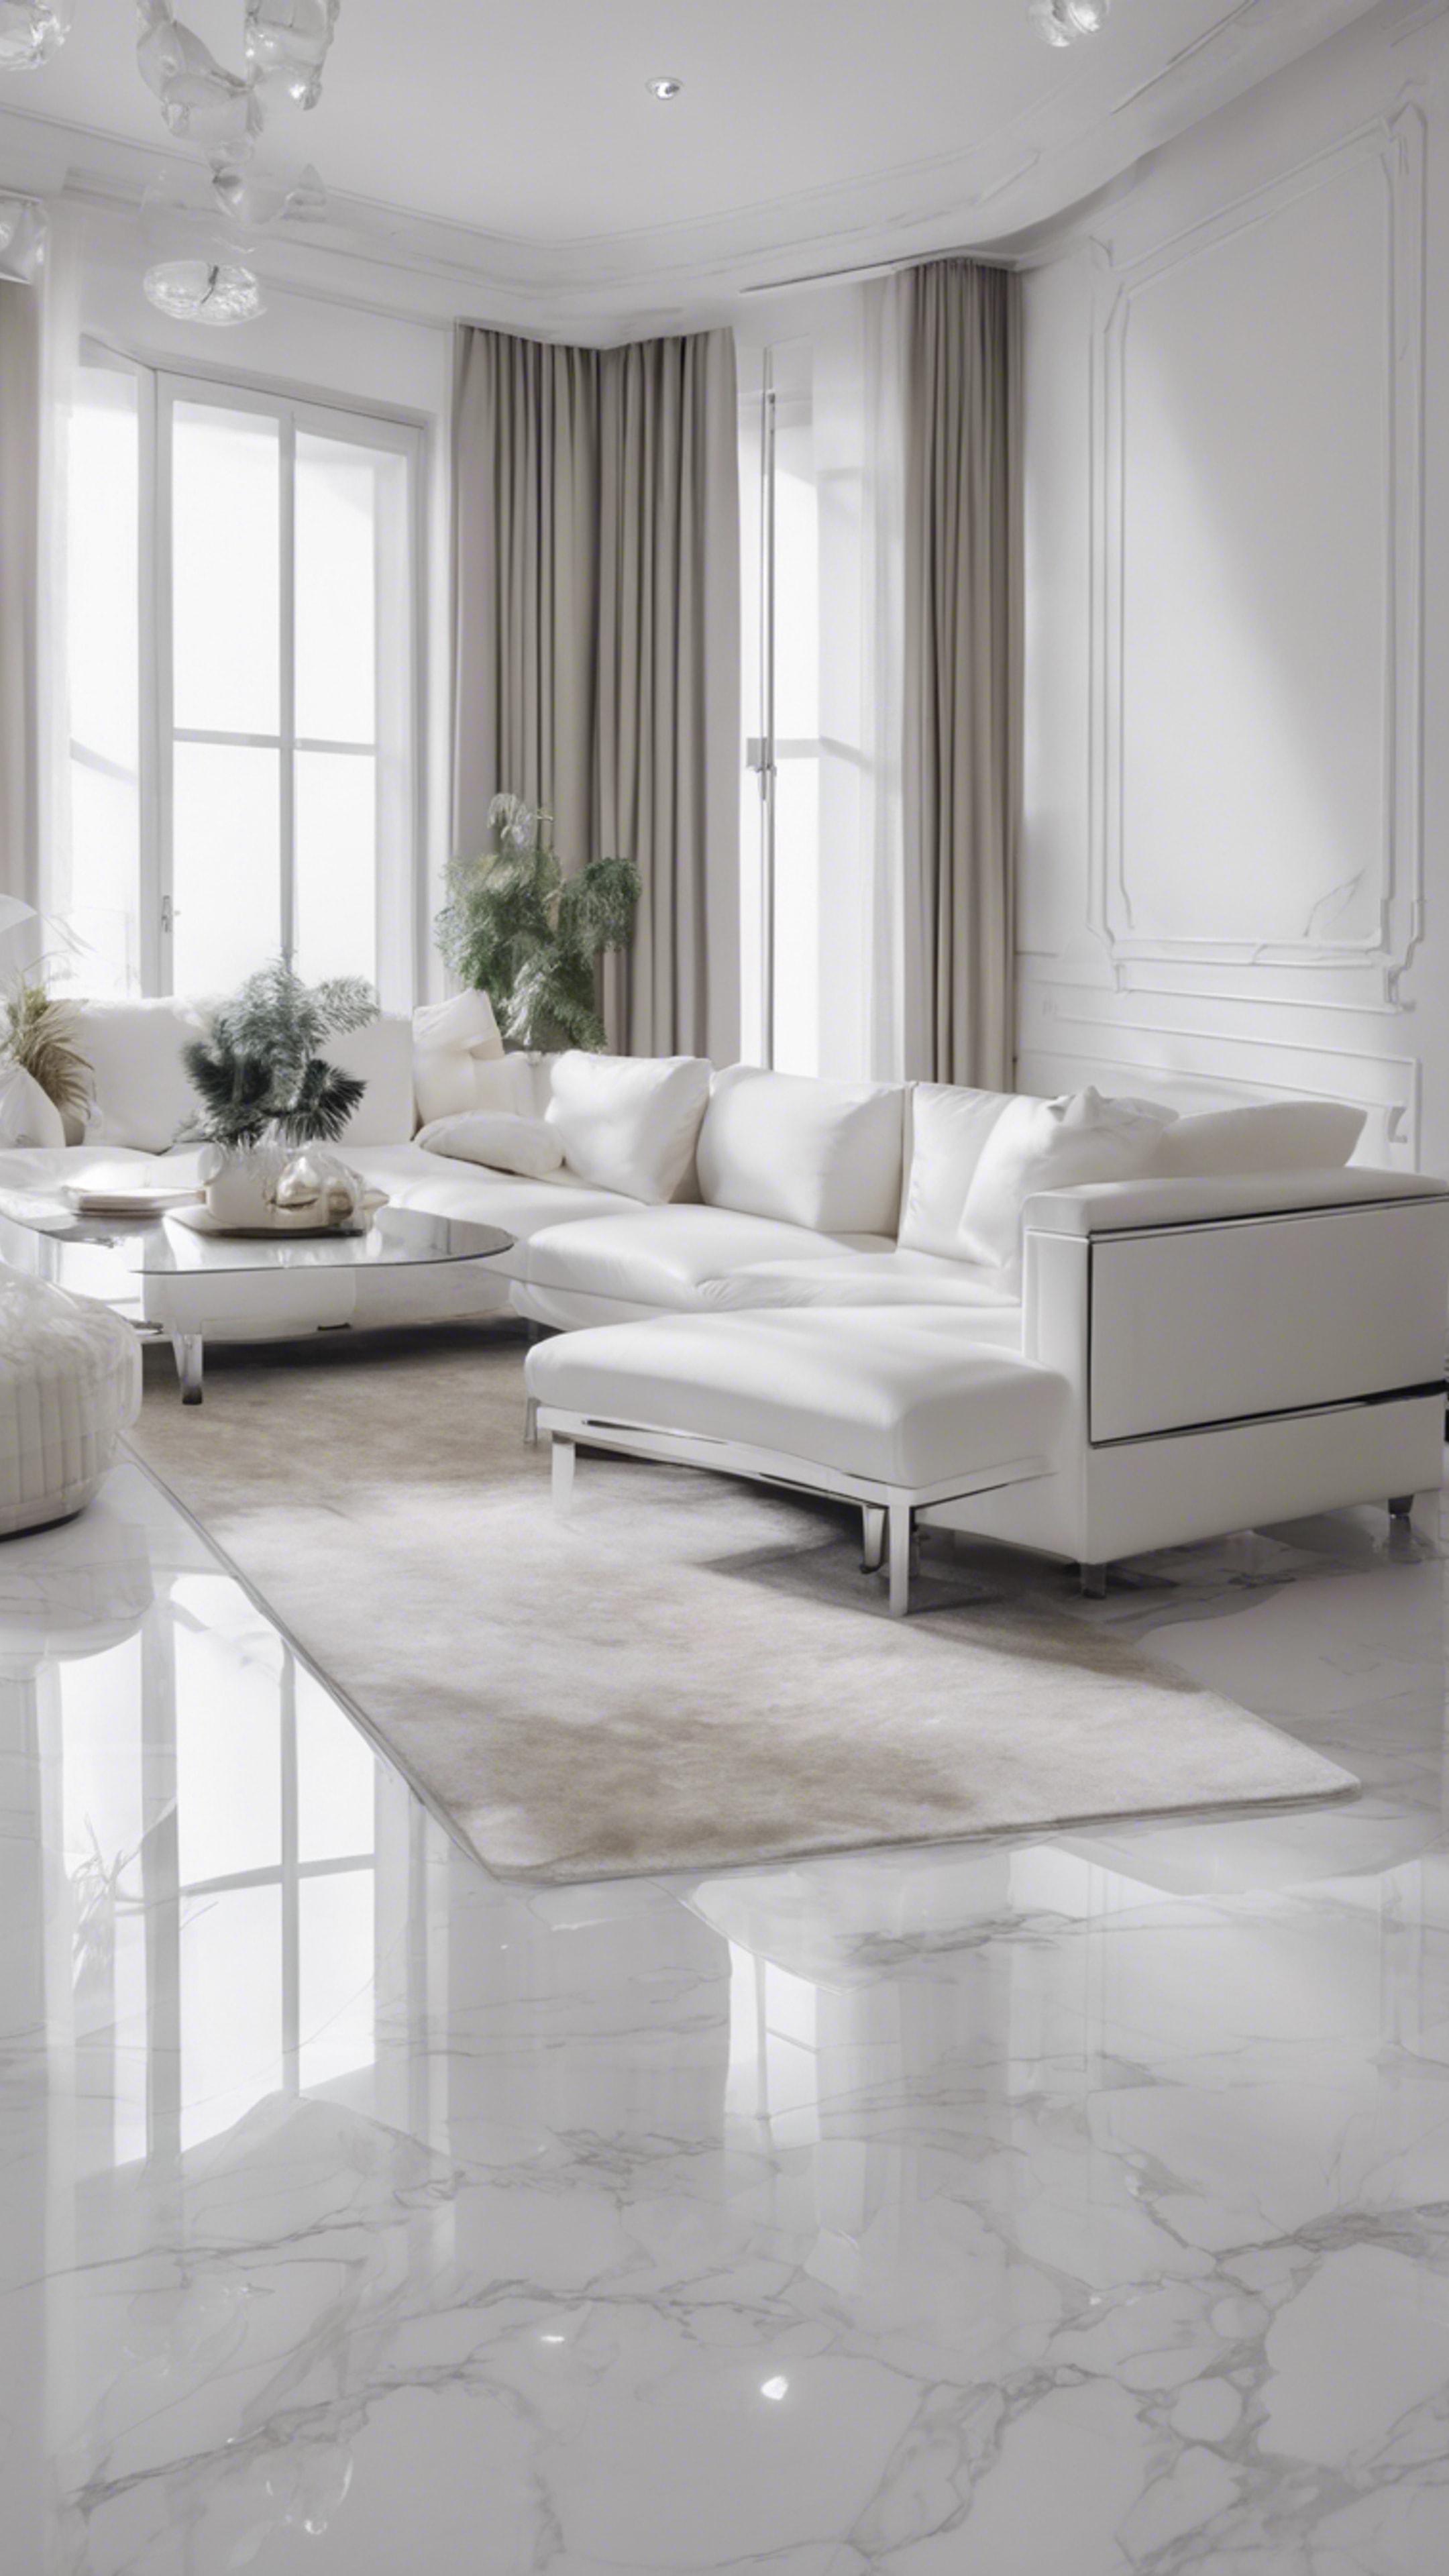 An ultra-modern minimalist interior design of a living room, with cool white walls, silver furniture and white marble floors. کاغذ دیواری[0b803decb0d241b99c2a]